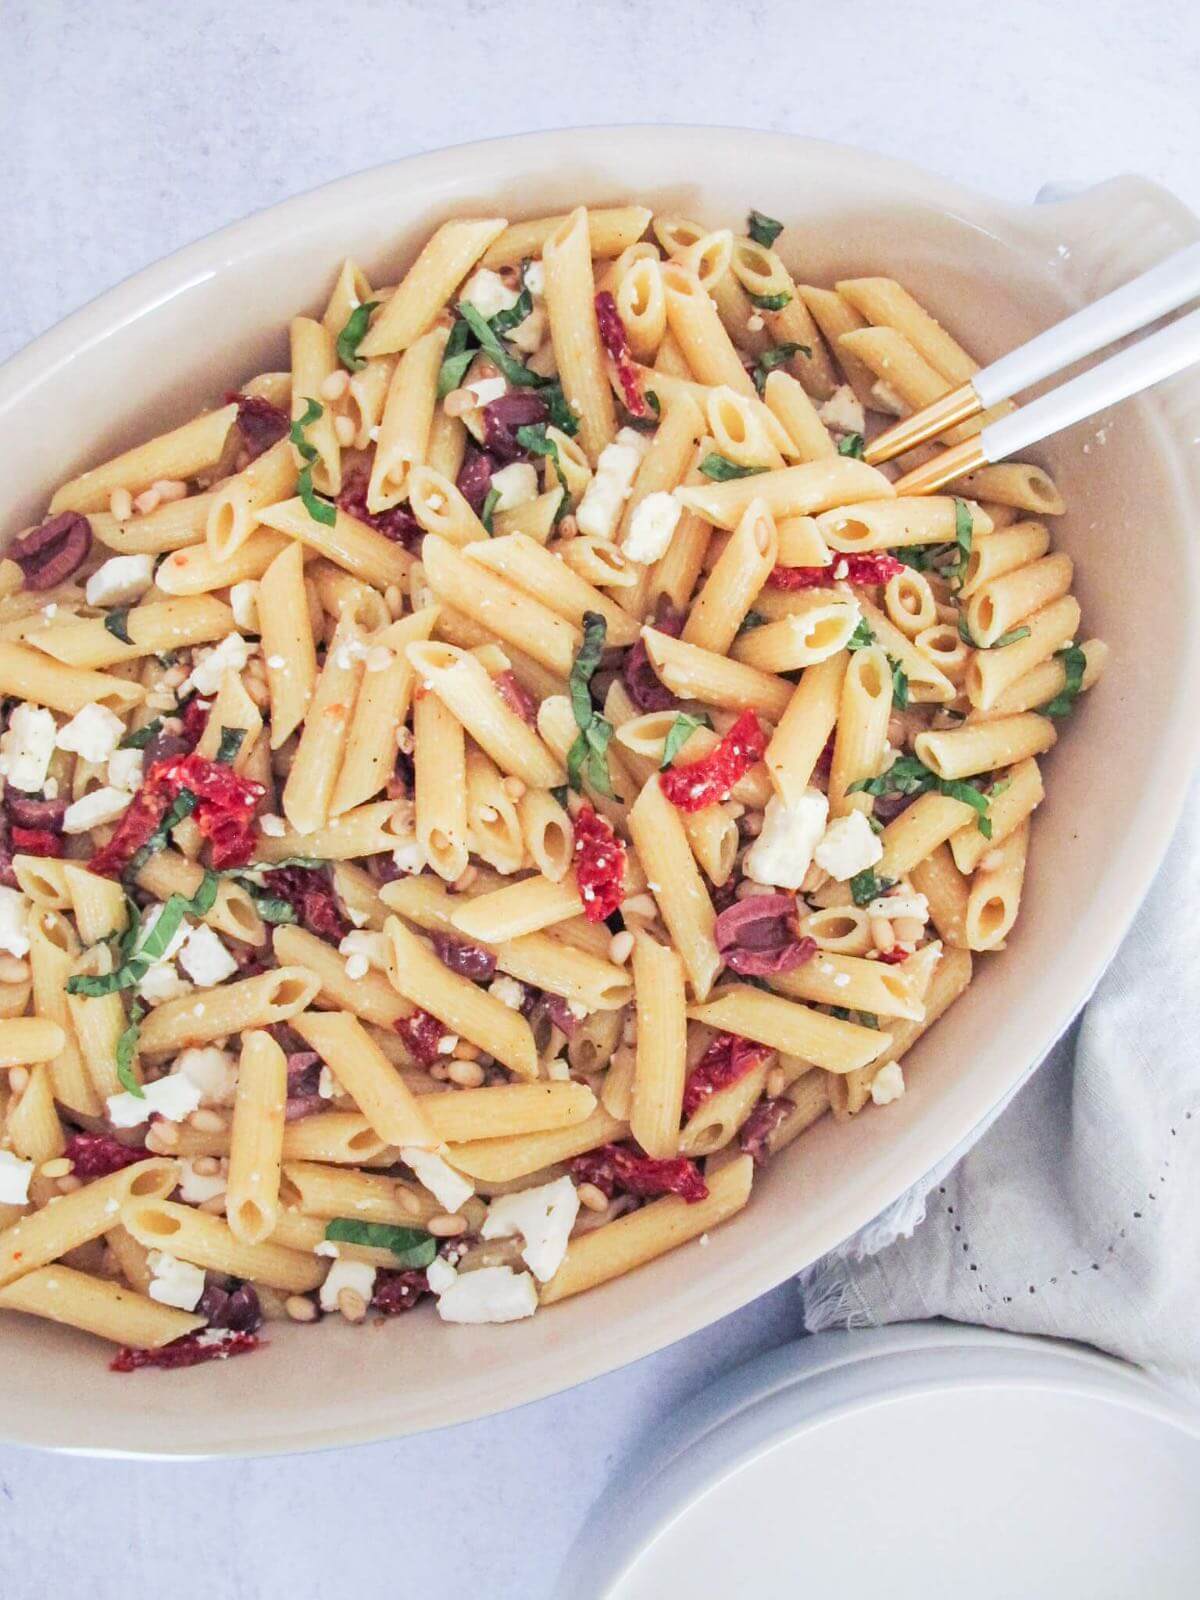 penne pasta with sundried tomatoes, feta cheese, kalamata olives in a white baking dish.